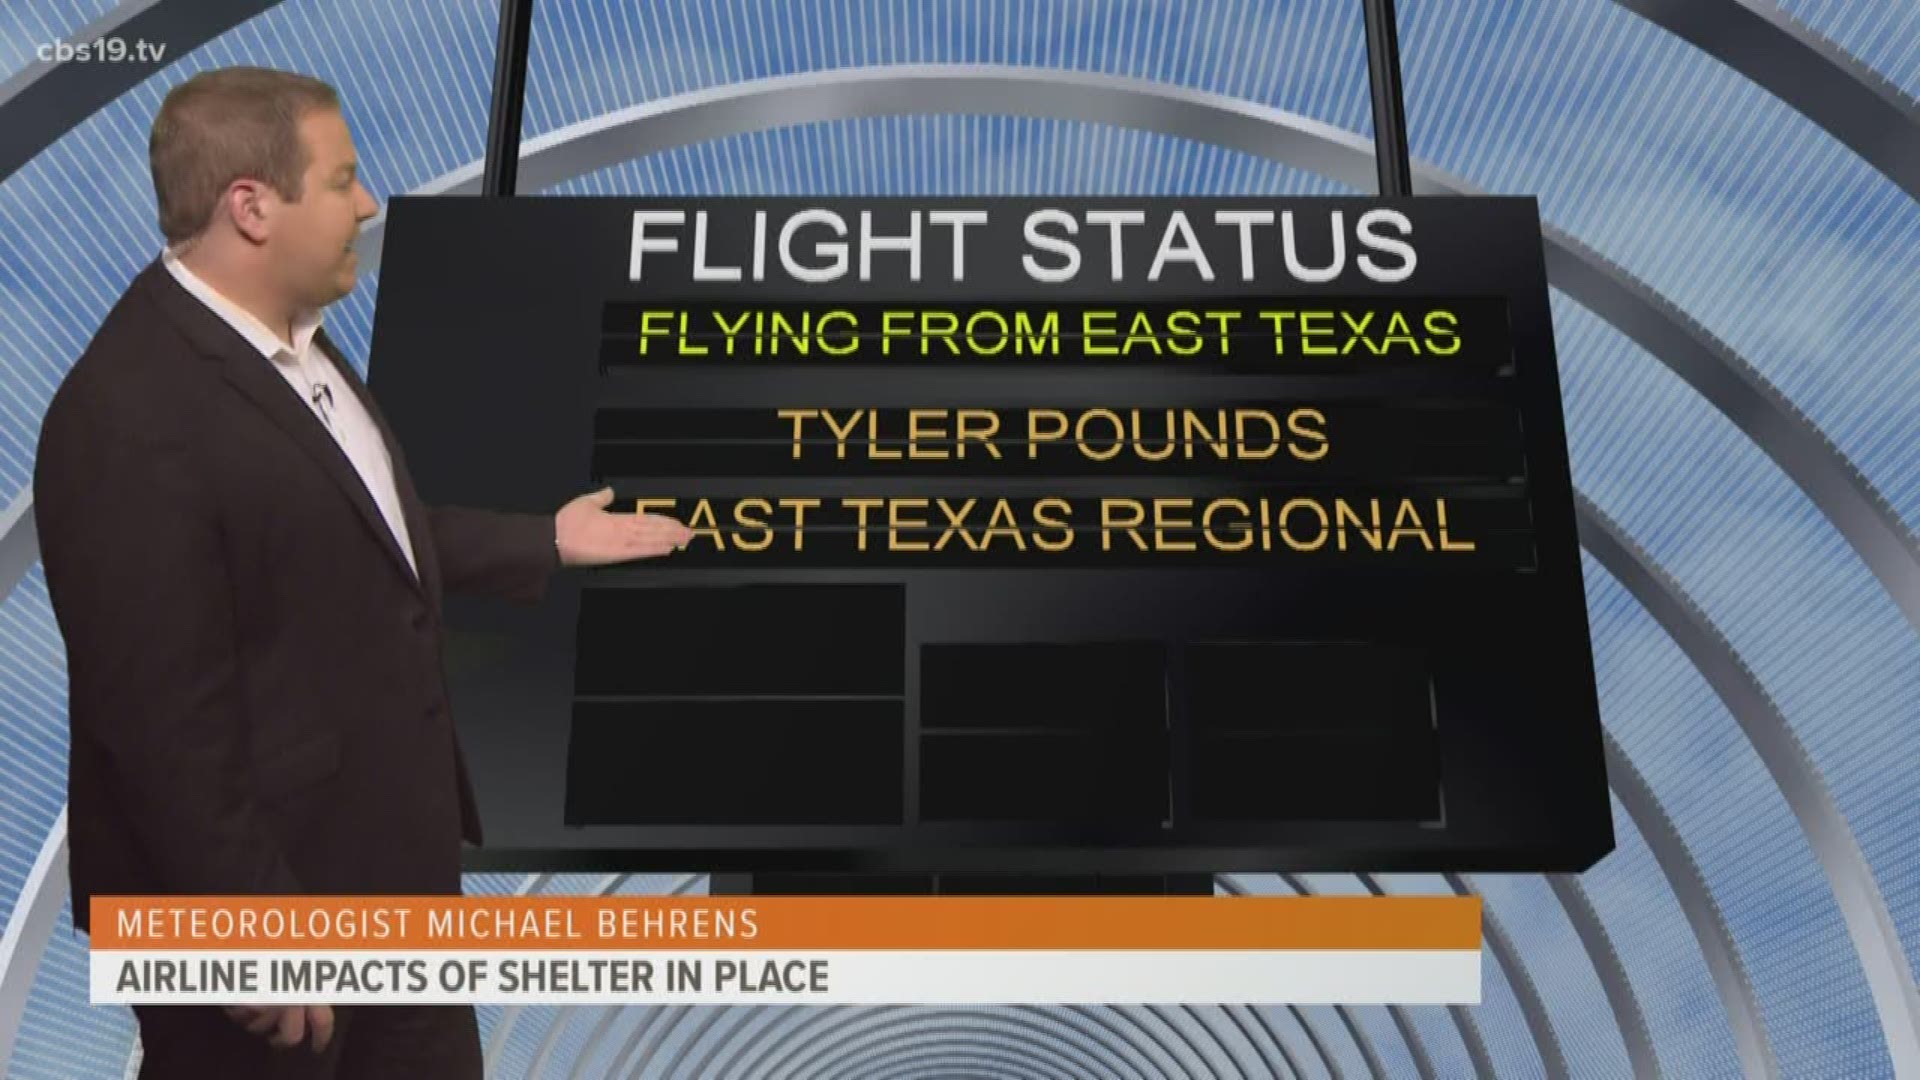 While many of us have cancelled our flight plans, some travel is unavoidable. How are airlines impacted by shelter in place? Meteorologist Michael Behrens found out!